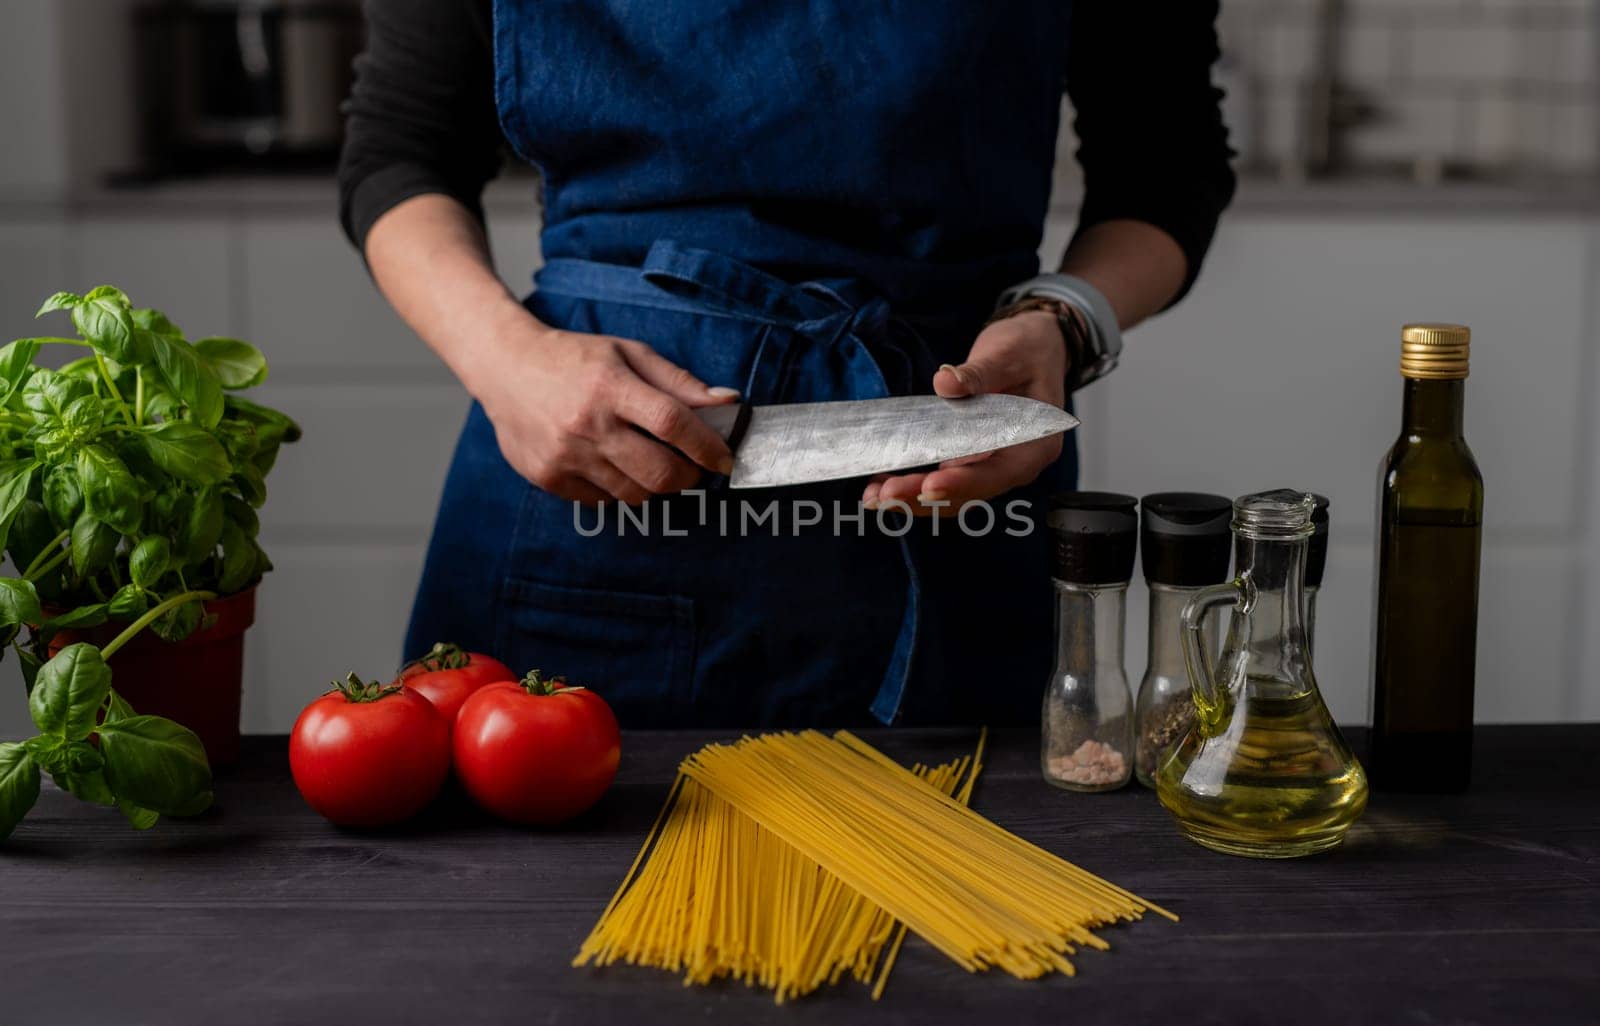 Housewife Checks Knife Sharpness Close Up Near Table With Tomatoes, Pasta, Greens